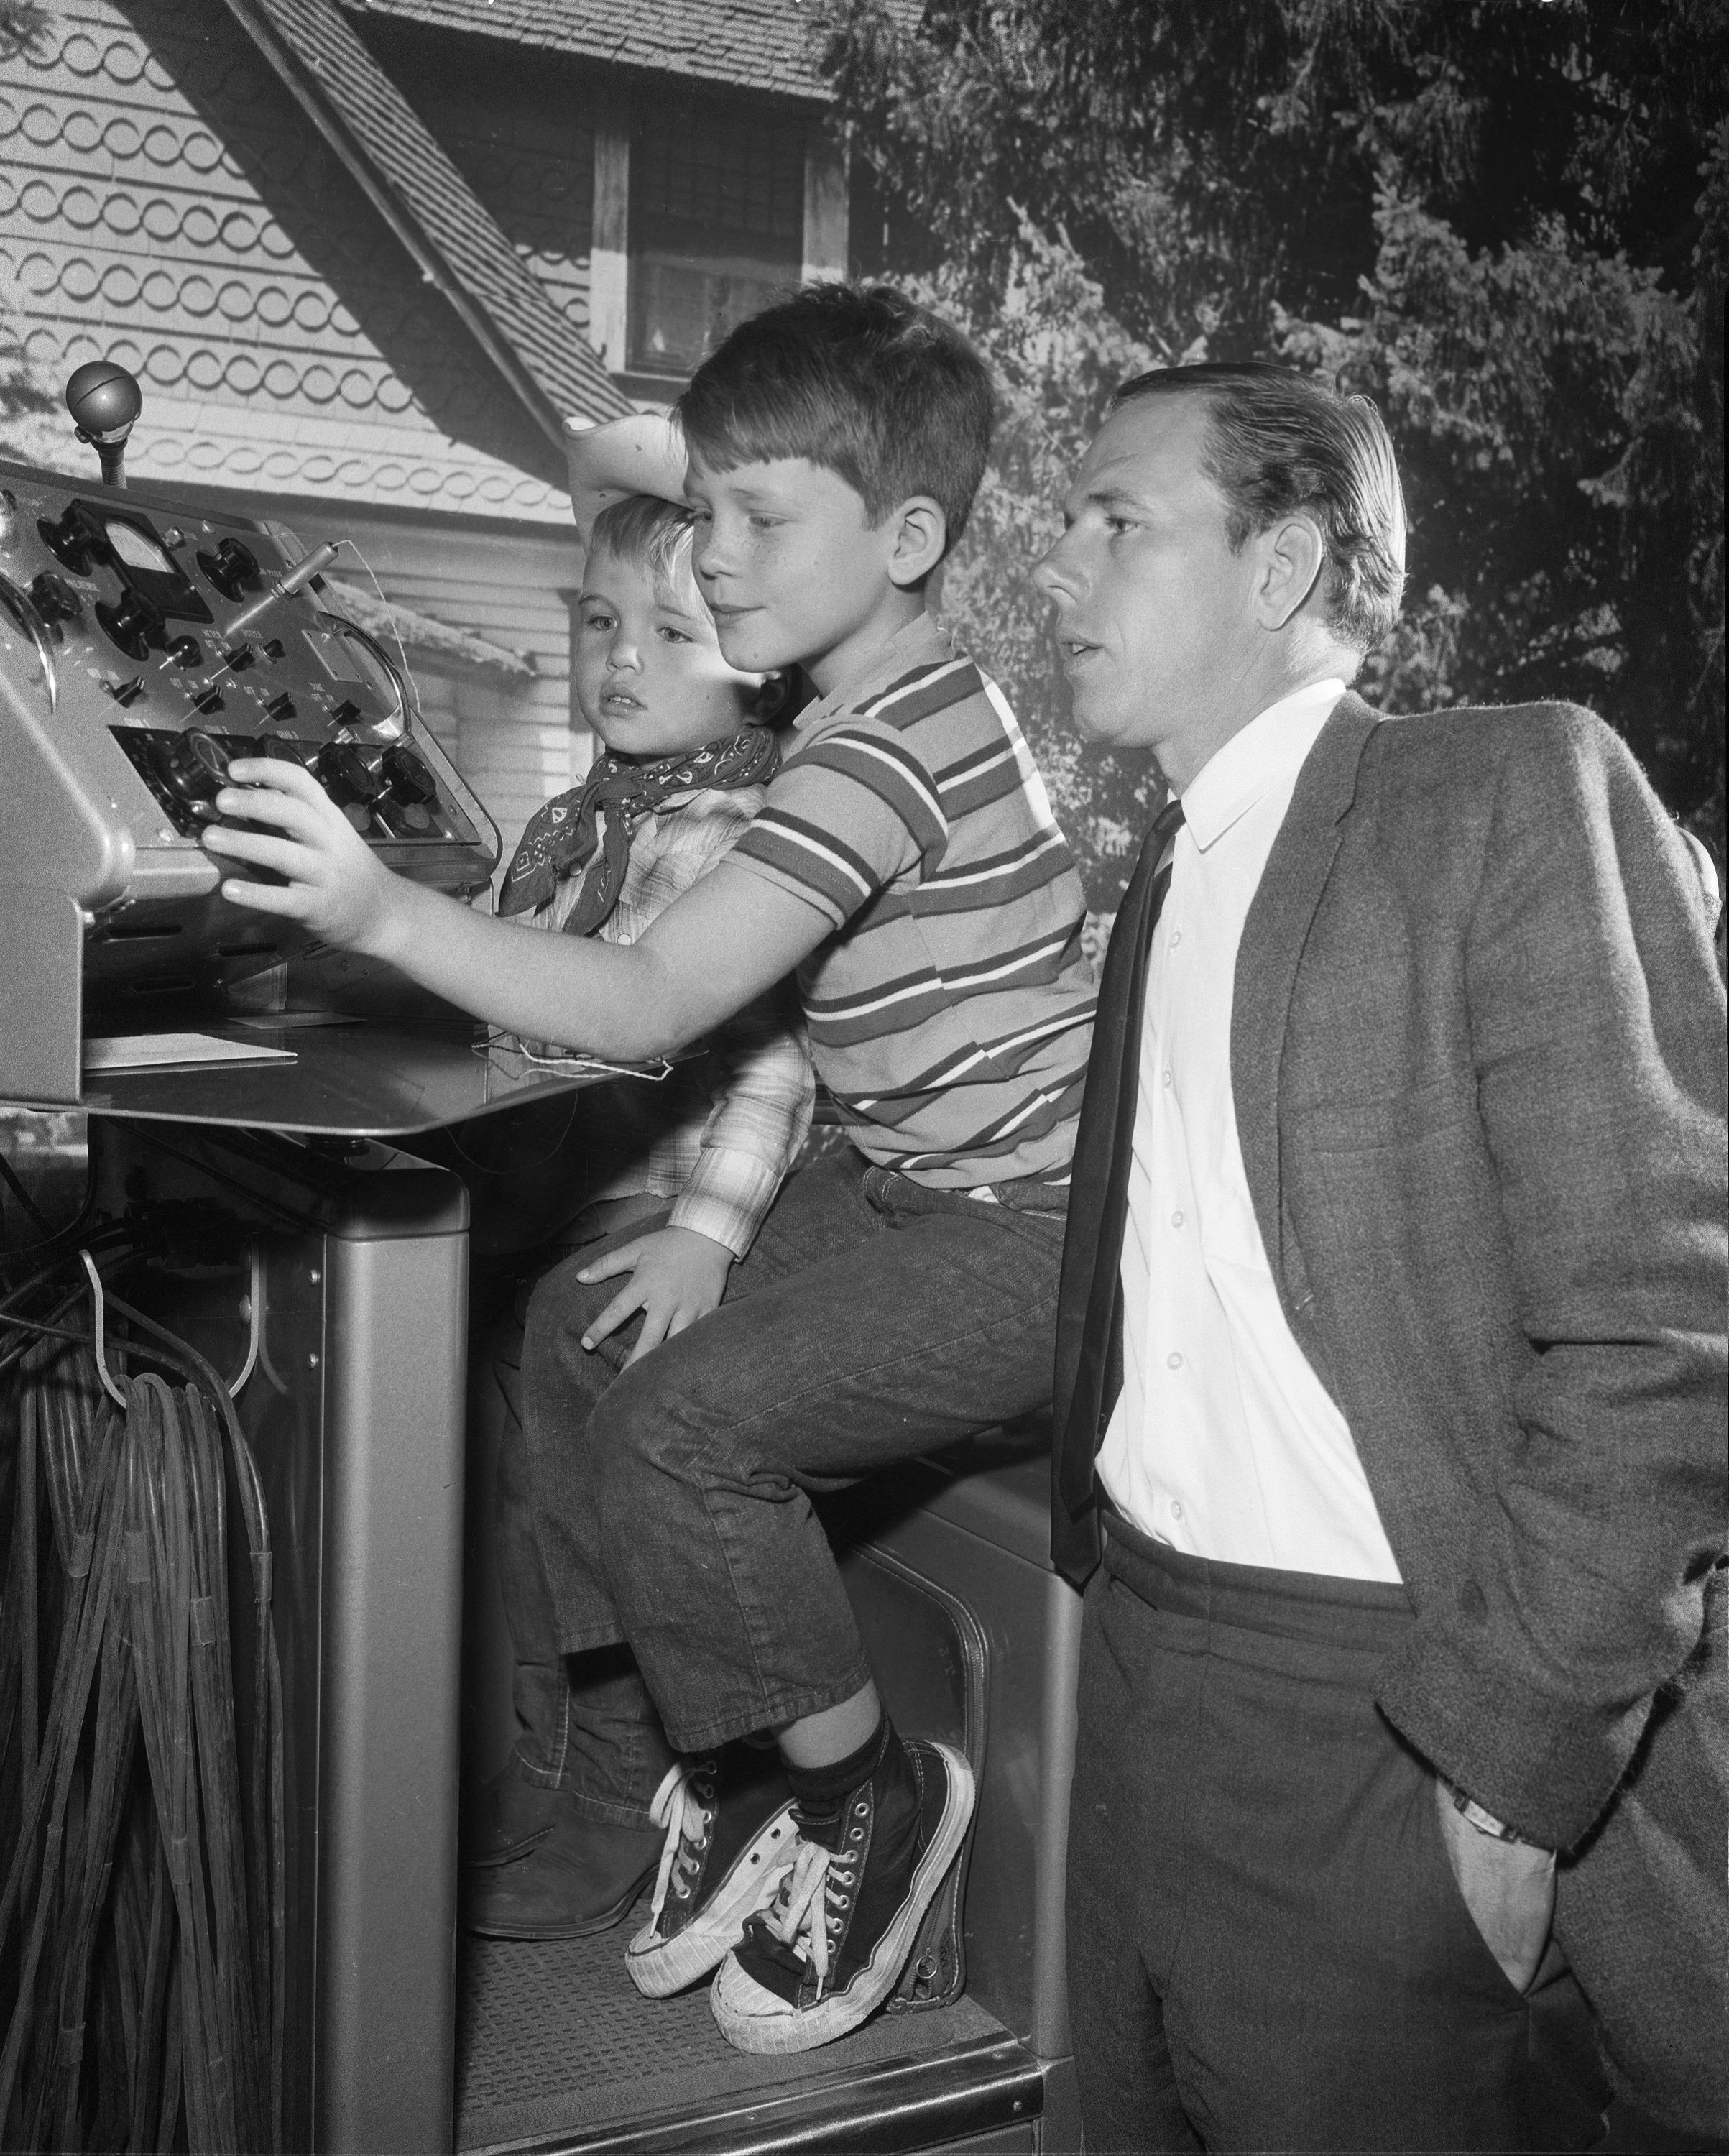 Actor Rance Howard, right, with his young sons (from left to right) Clint Howard and Ron Howard, on the set of 'The Andy Griffith Show' in 1963